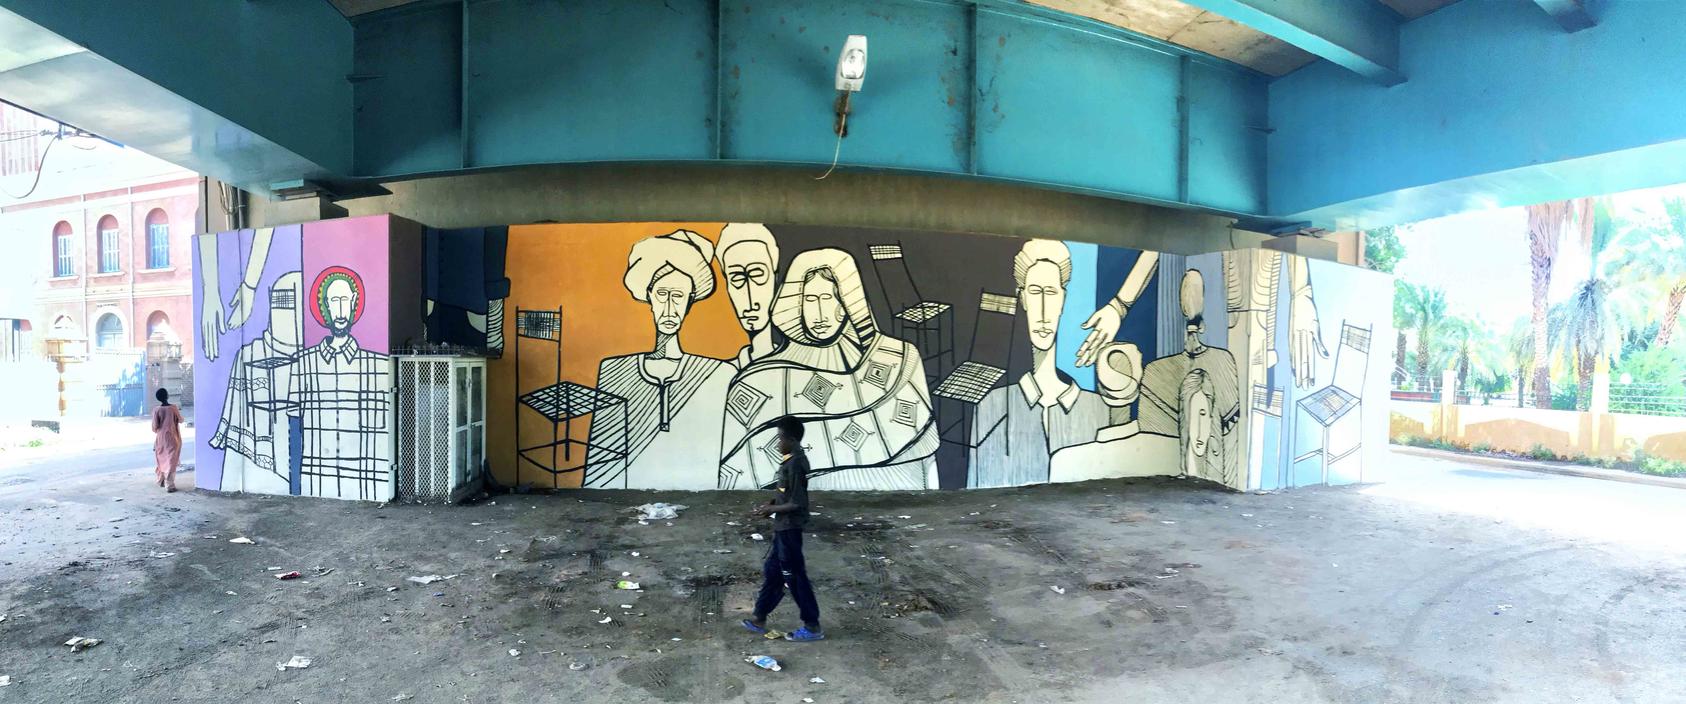 Galal calls this mural, under Mak Nimr bridge in Khartoum, "for the people and by the people" because it was created with the support of a team of volunteers. This mural marks the signing of the agreement for a 39-month transitional period. (Galal Yousif)